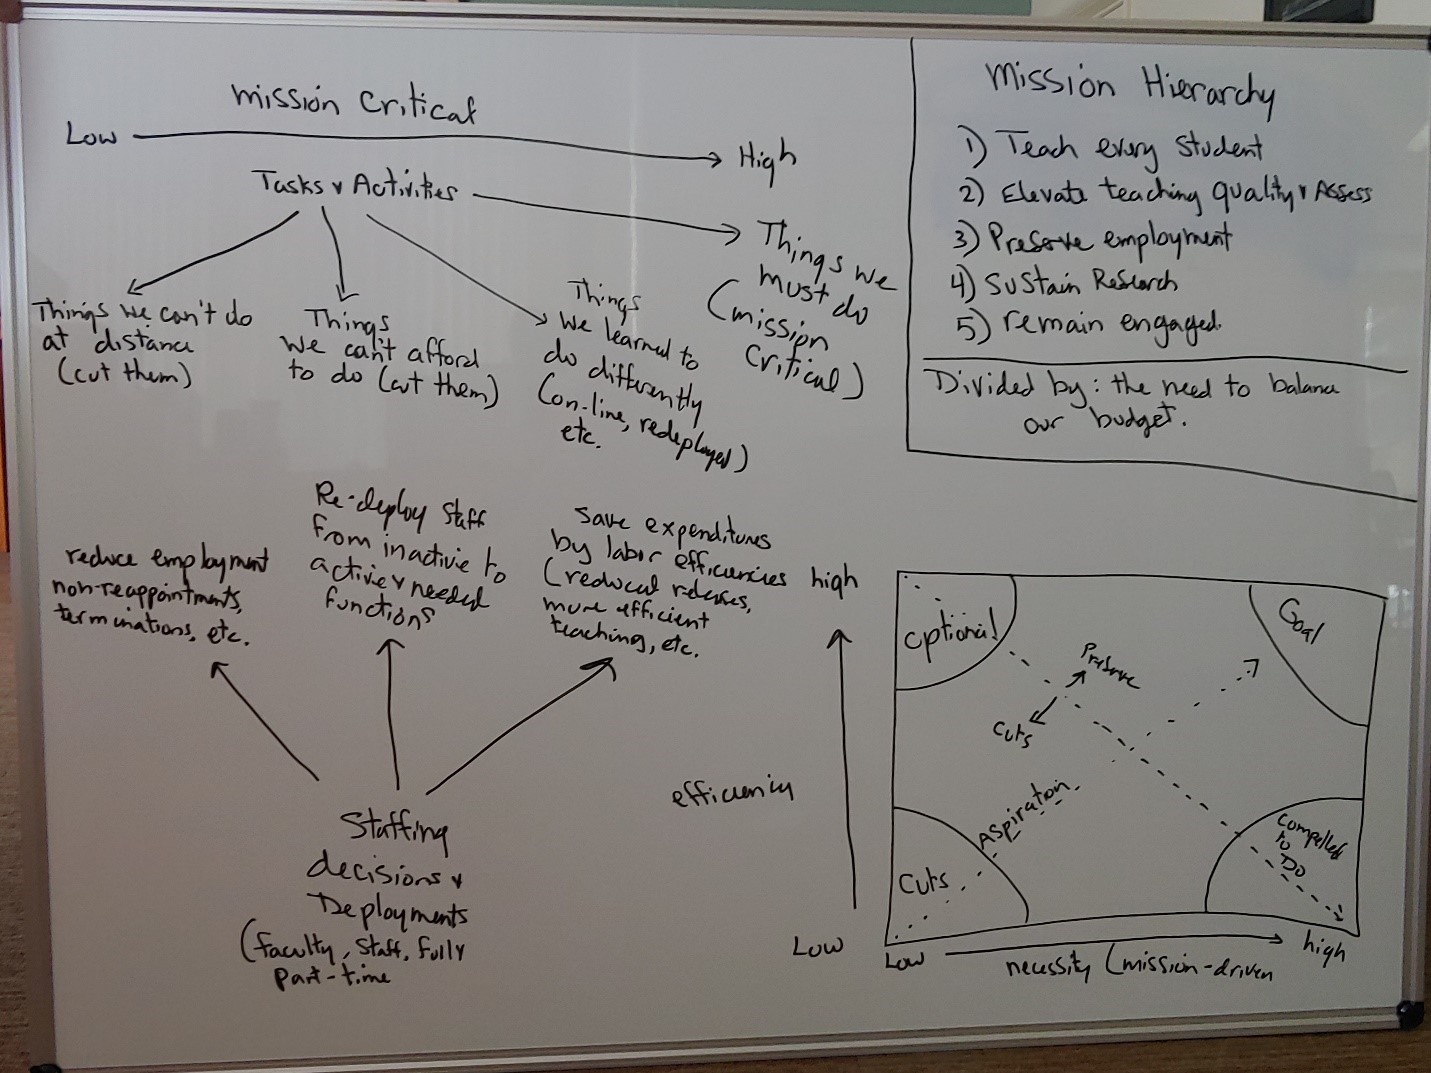 Whiteboard-drawn image of mission-critical projects